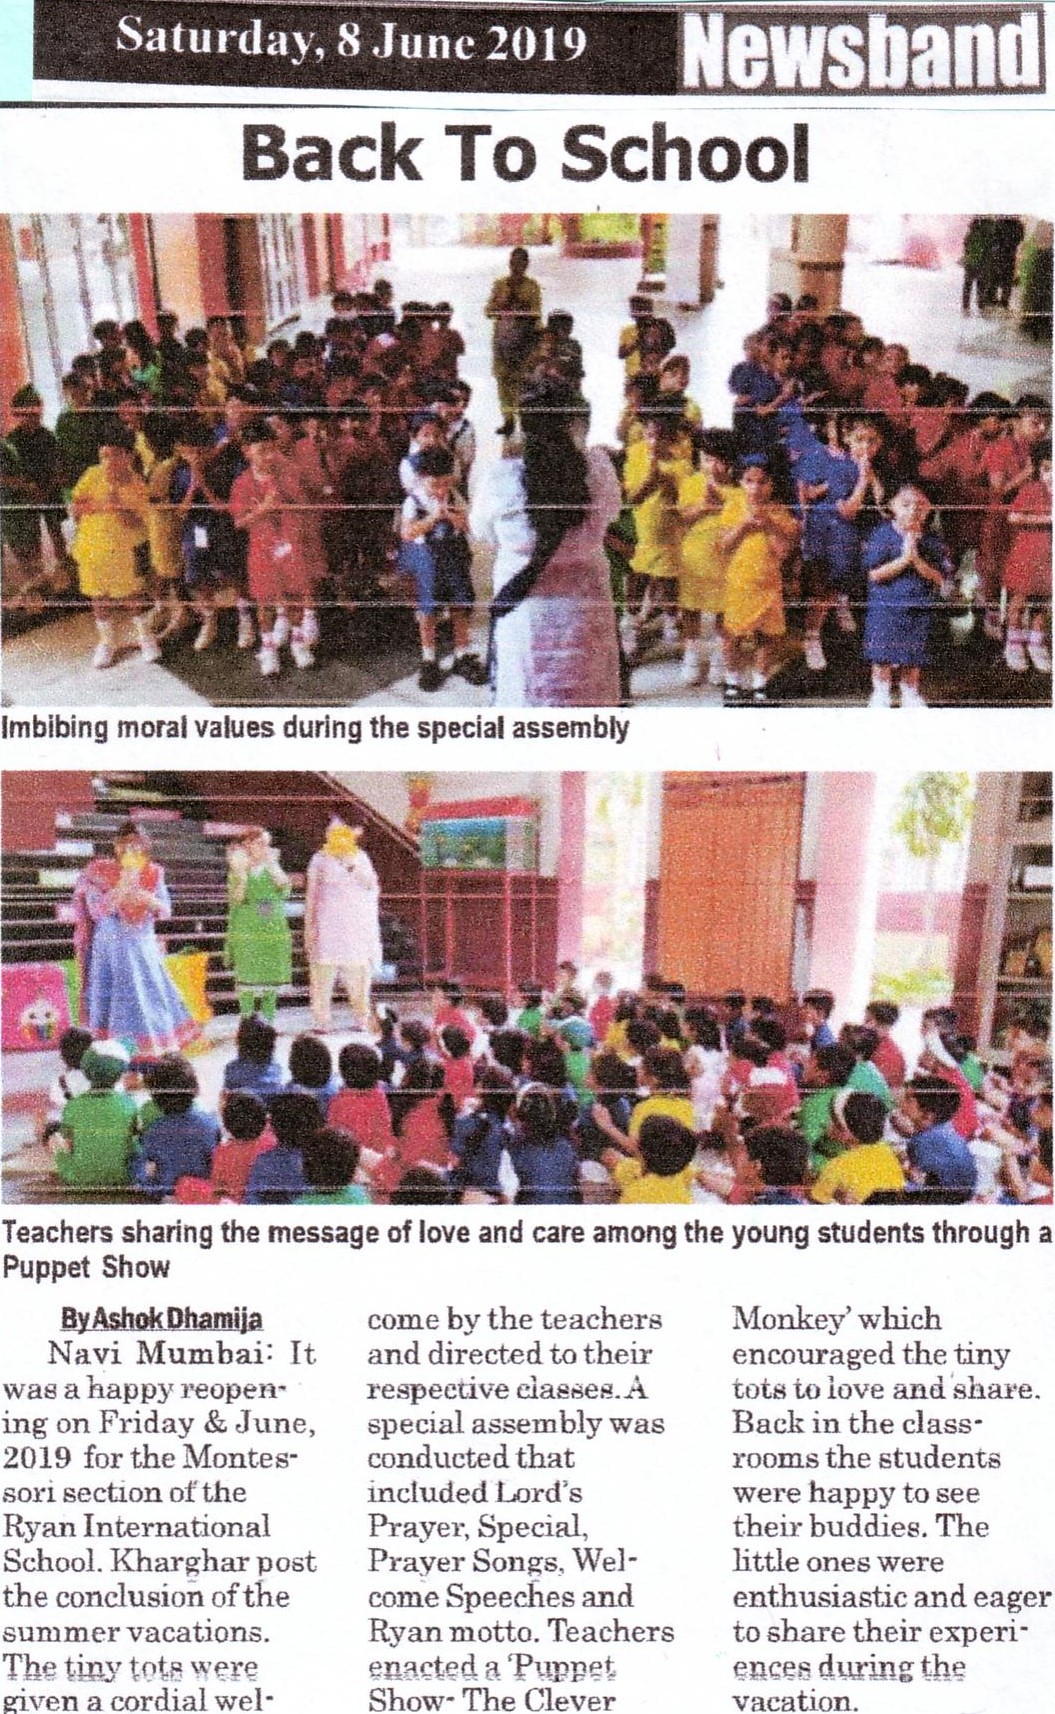 Back to school, was mentioned in News band - Ryan International School, Kharghar